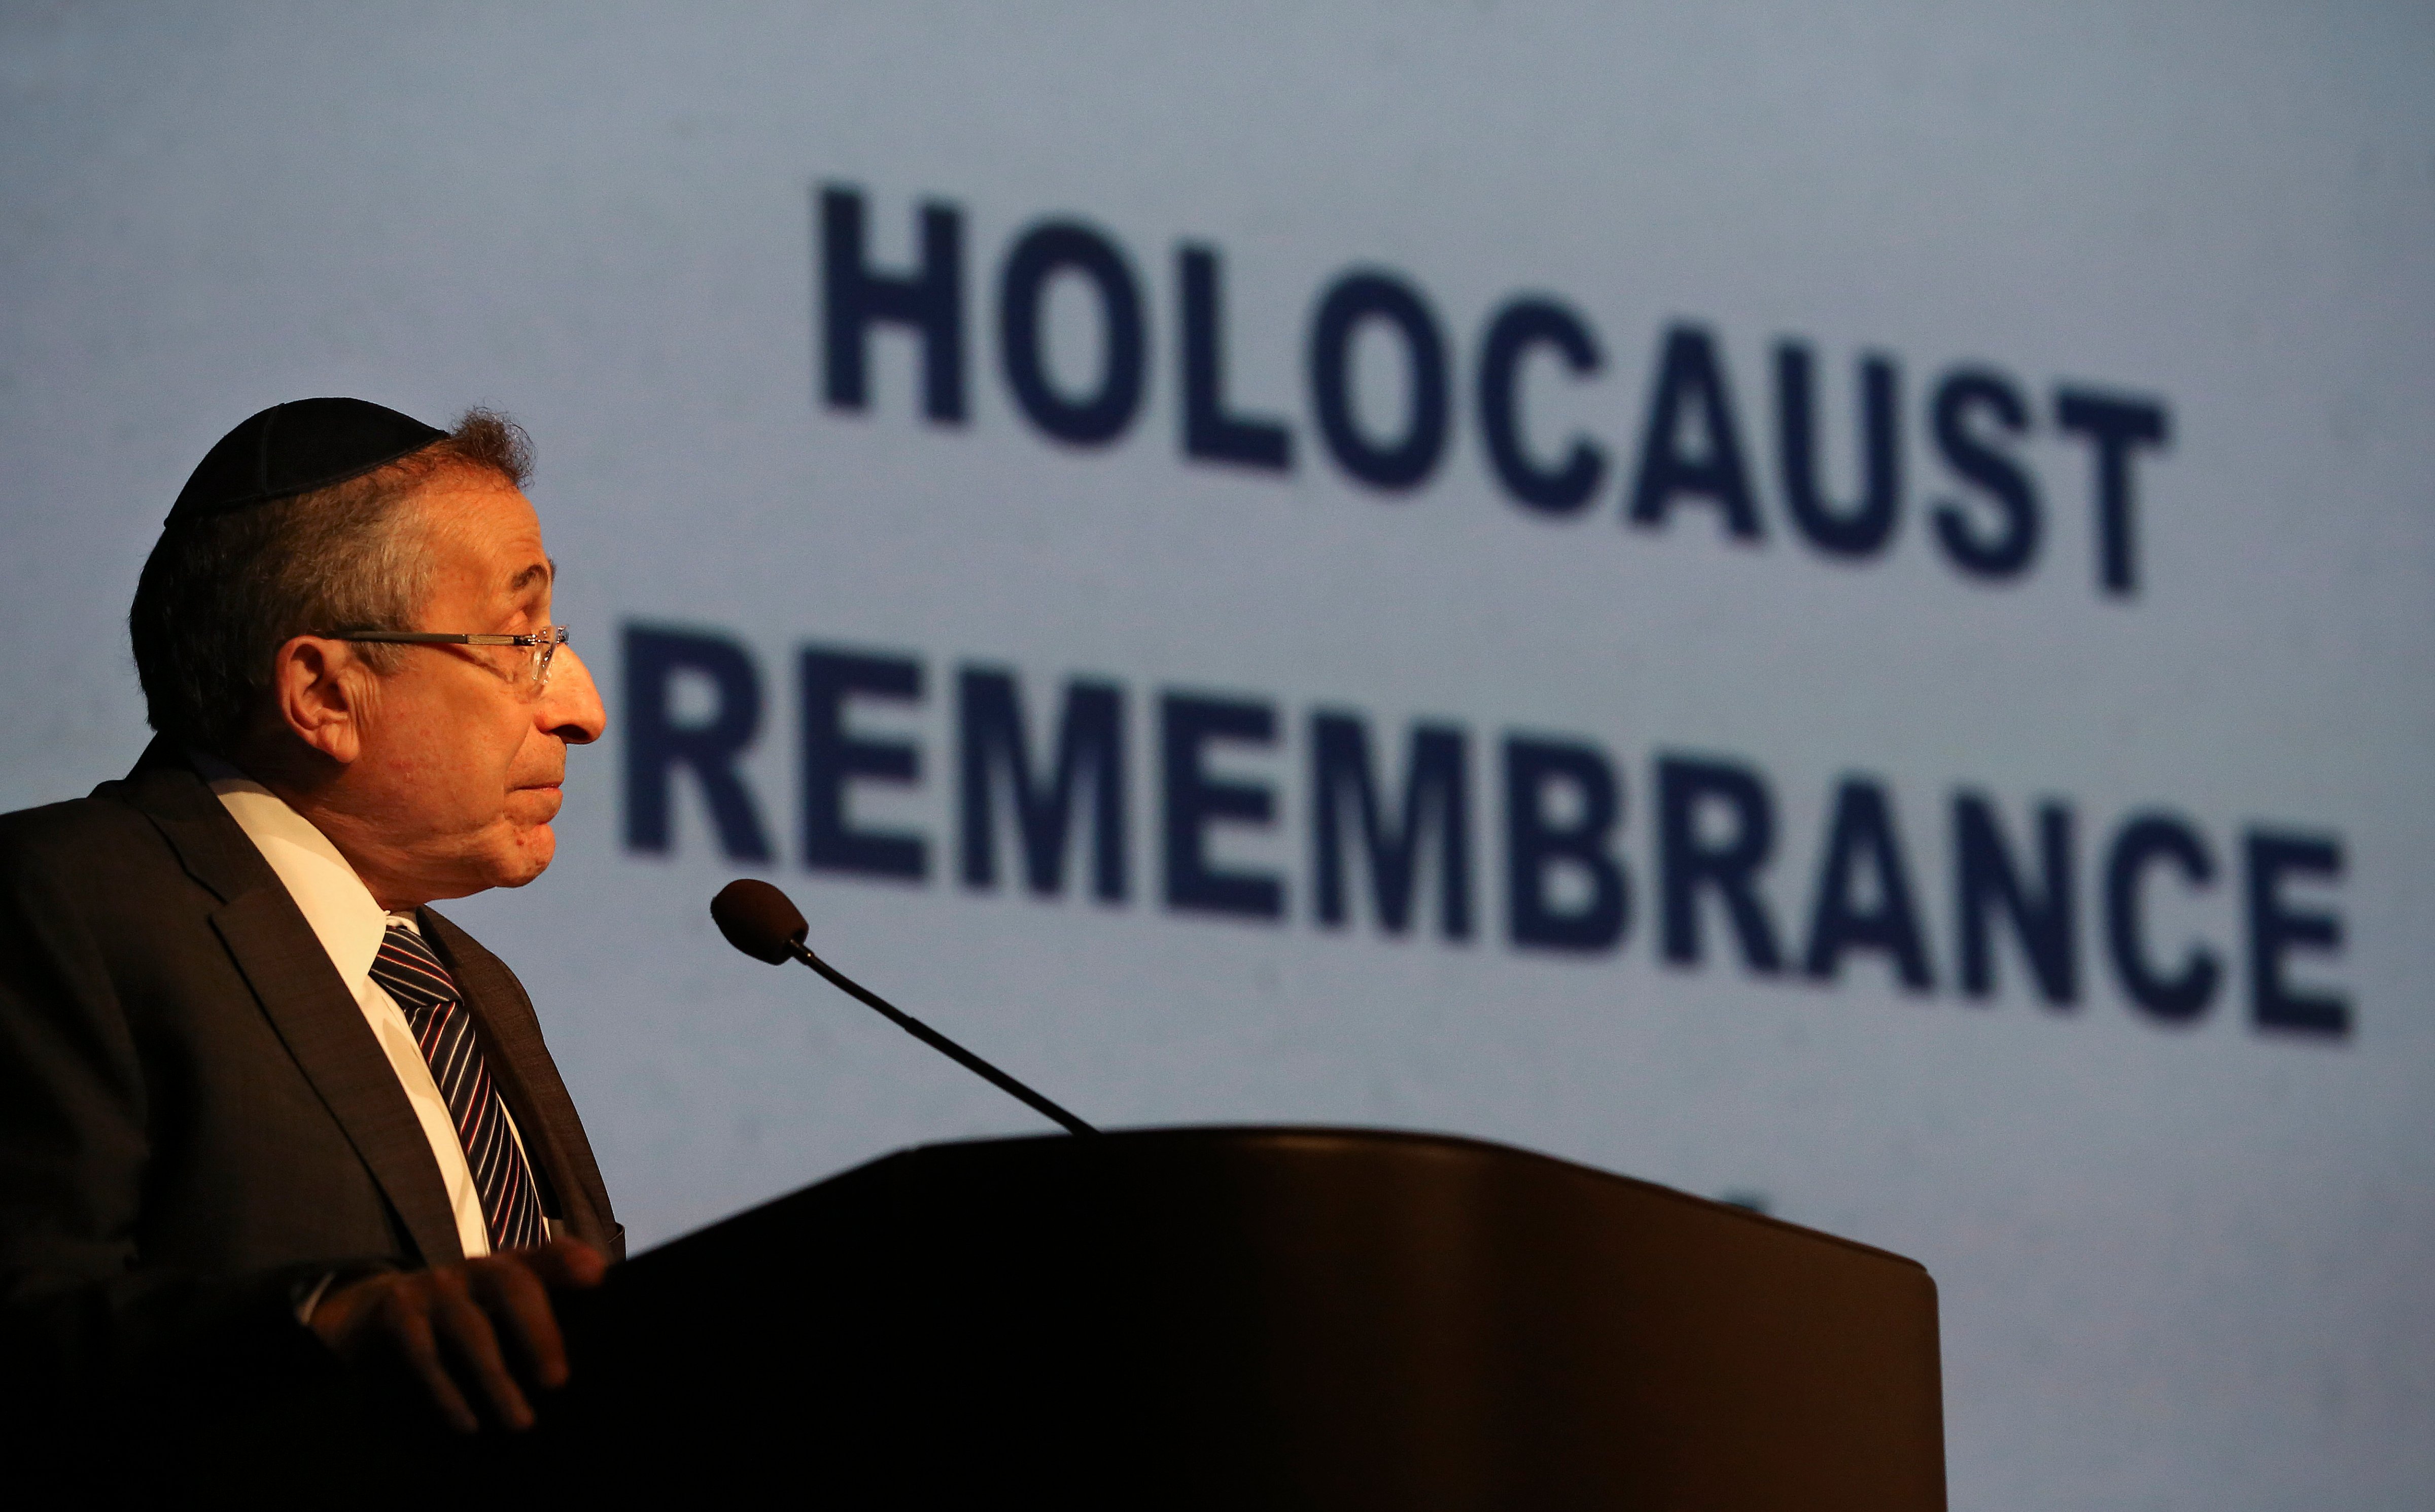 Rabbi Marvin Hier, Founder and Dean of the Simon Wiesenthal Center in Los Angeles, delivers the keynote address during Holocaust Remembrance Day at the Simon Wiesenthal Center on April 16, 2015 in Los Angeles, California. (Mel Melcon&mdash;LA Times via Getty Images)